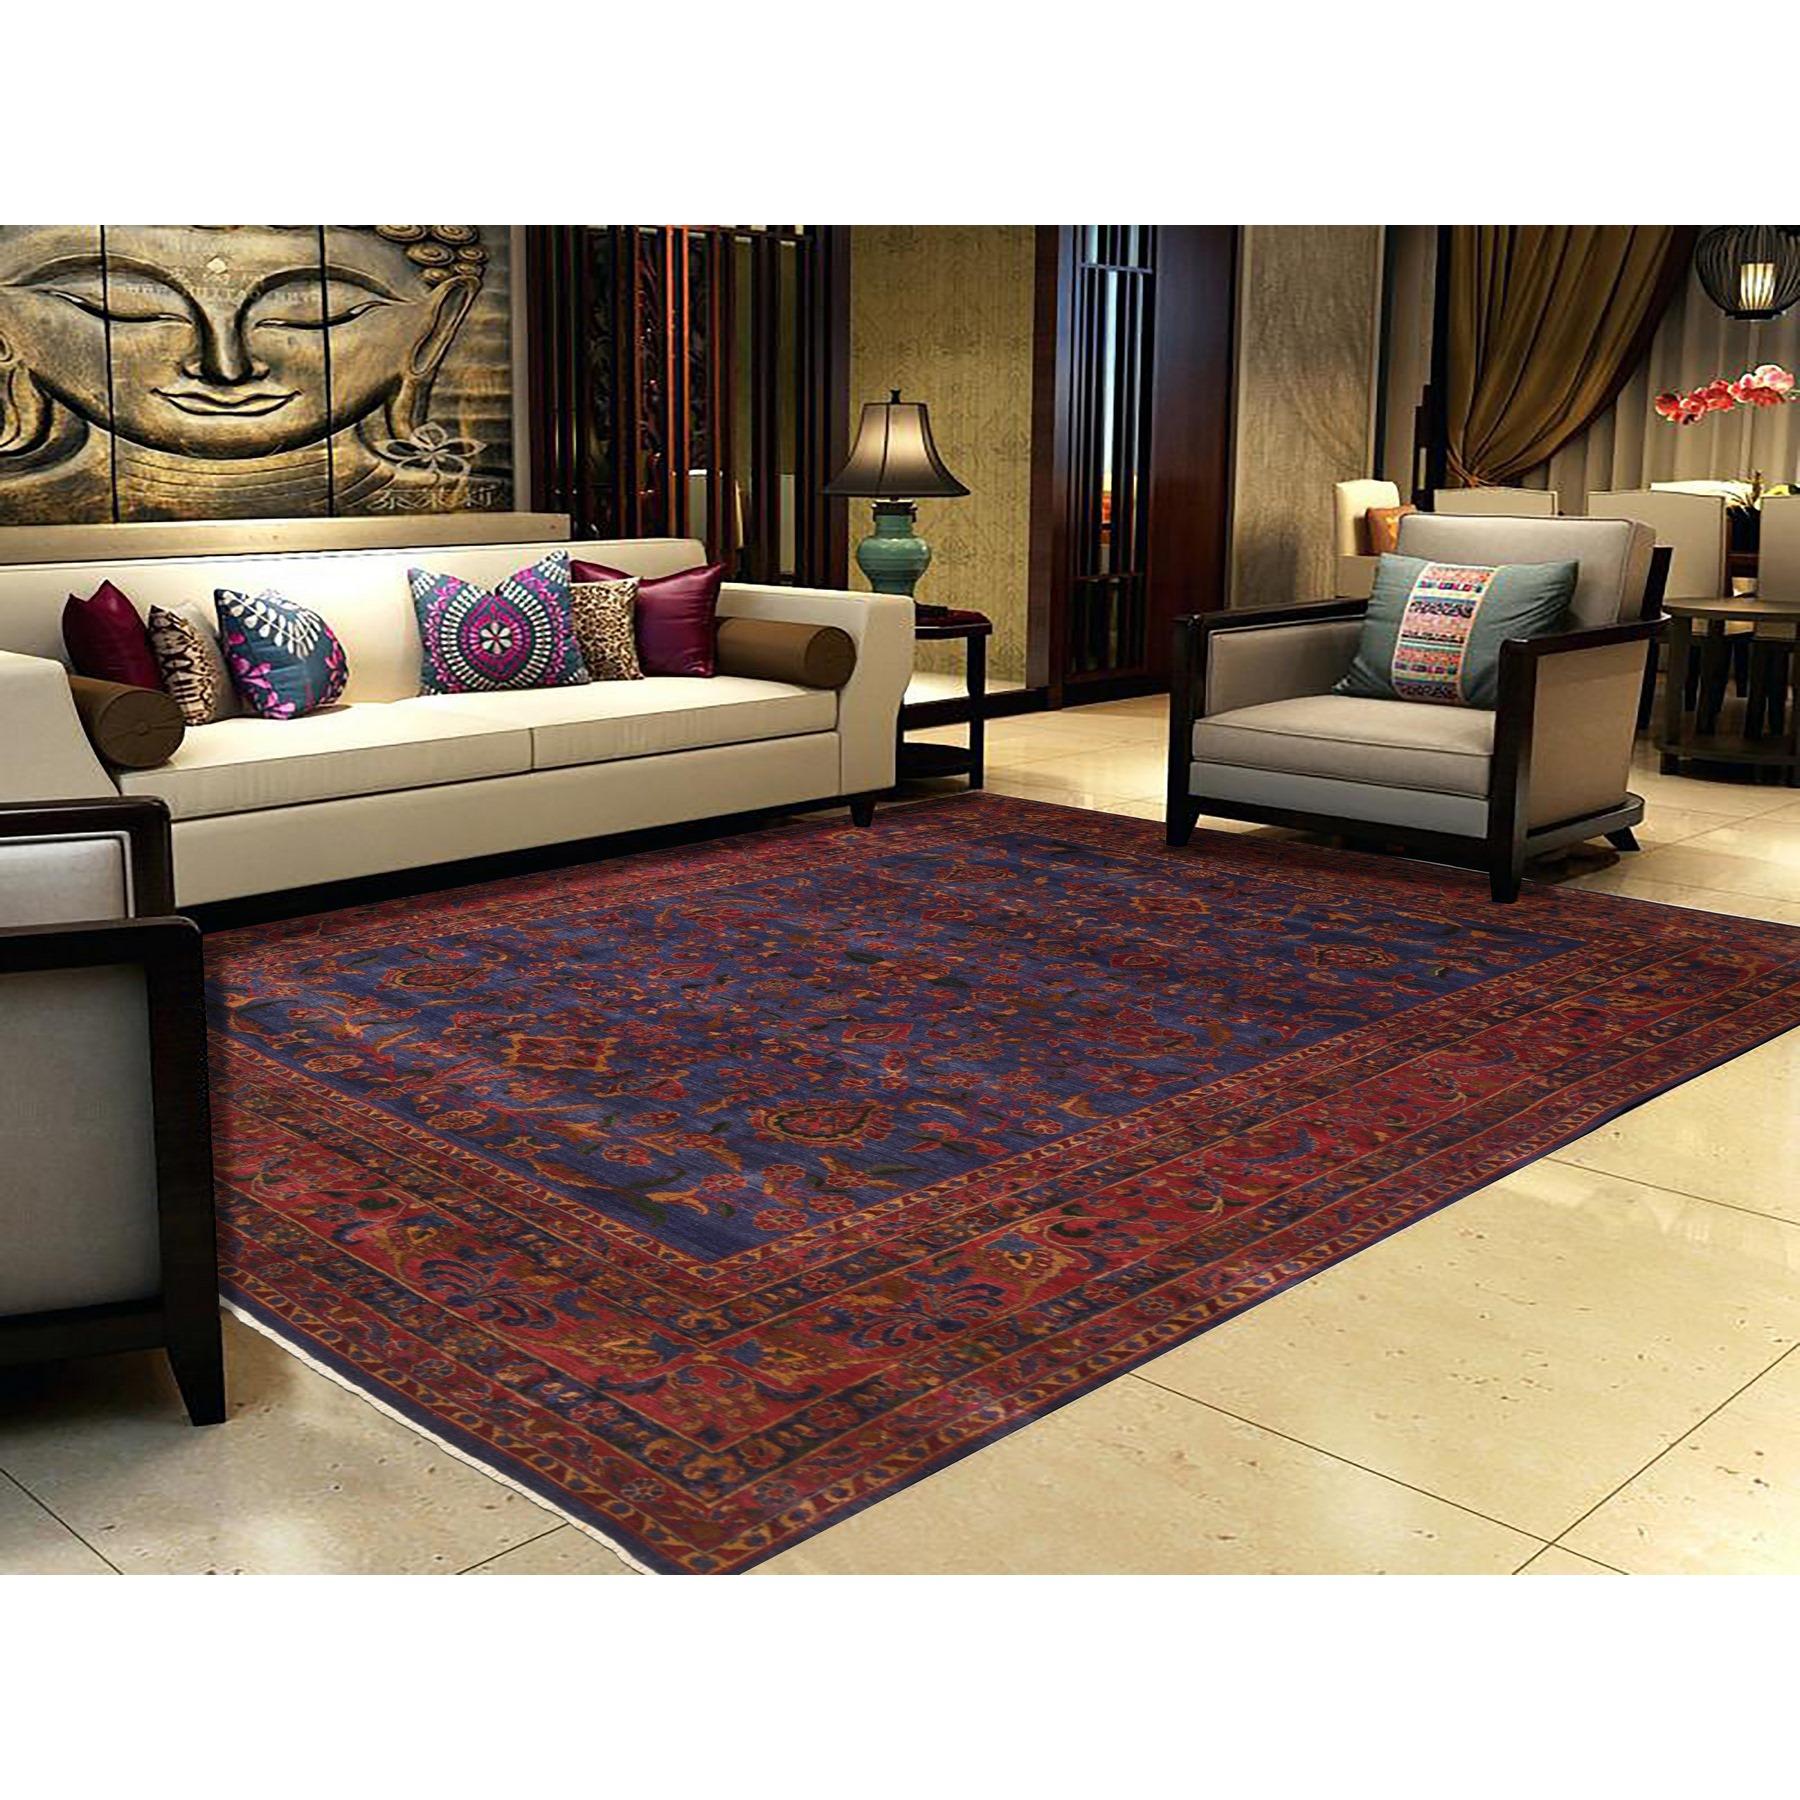 This fabulous hand-knotted carpet has been created and designed for extra strength and durability. This rug has been handcrafted for weeks in the traditional method that is used to make
Exact Rug Size in Feet and Inches : 8'10